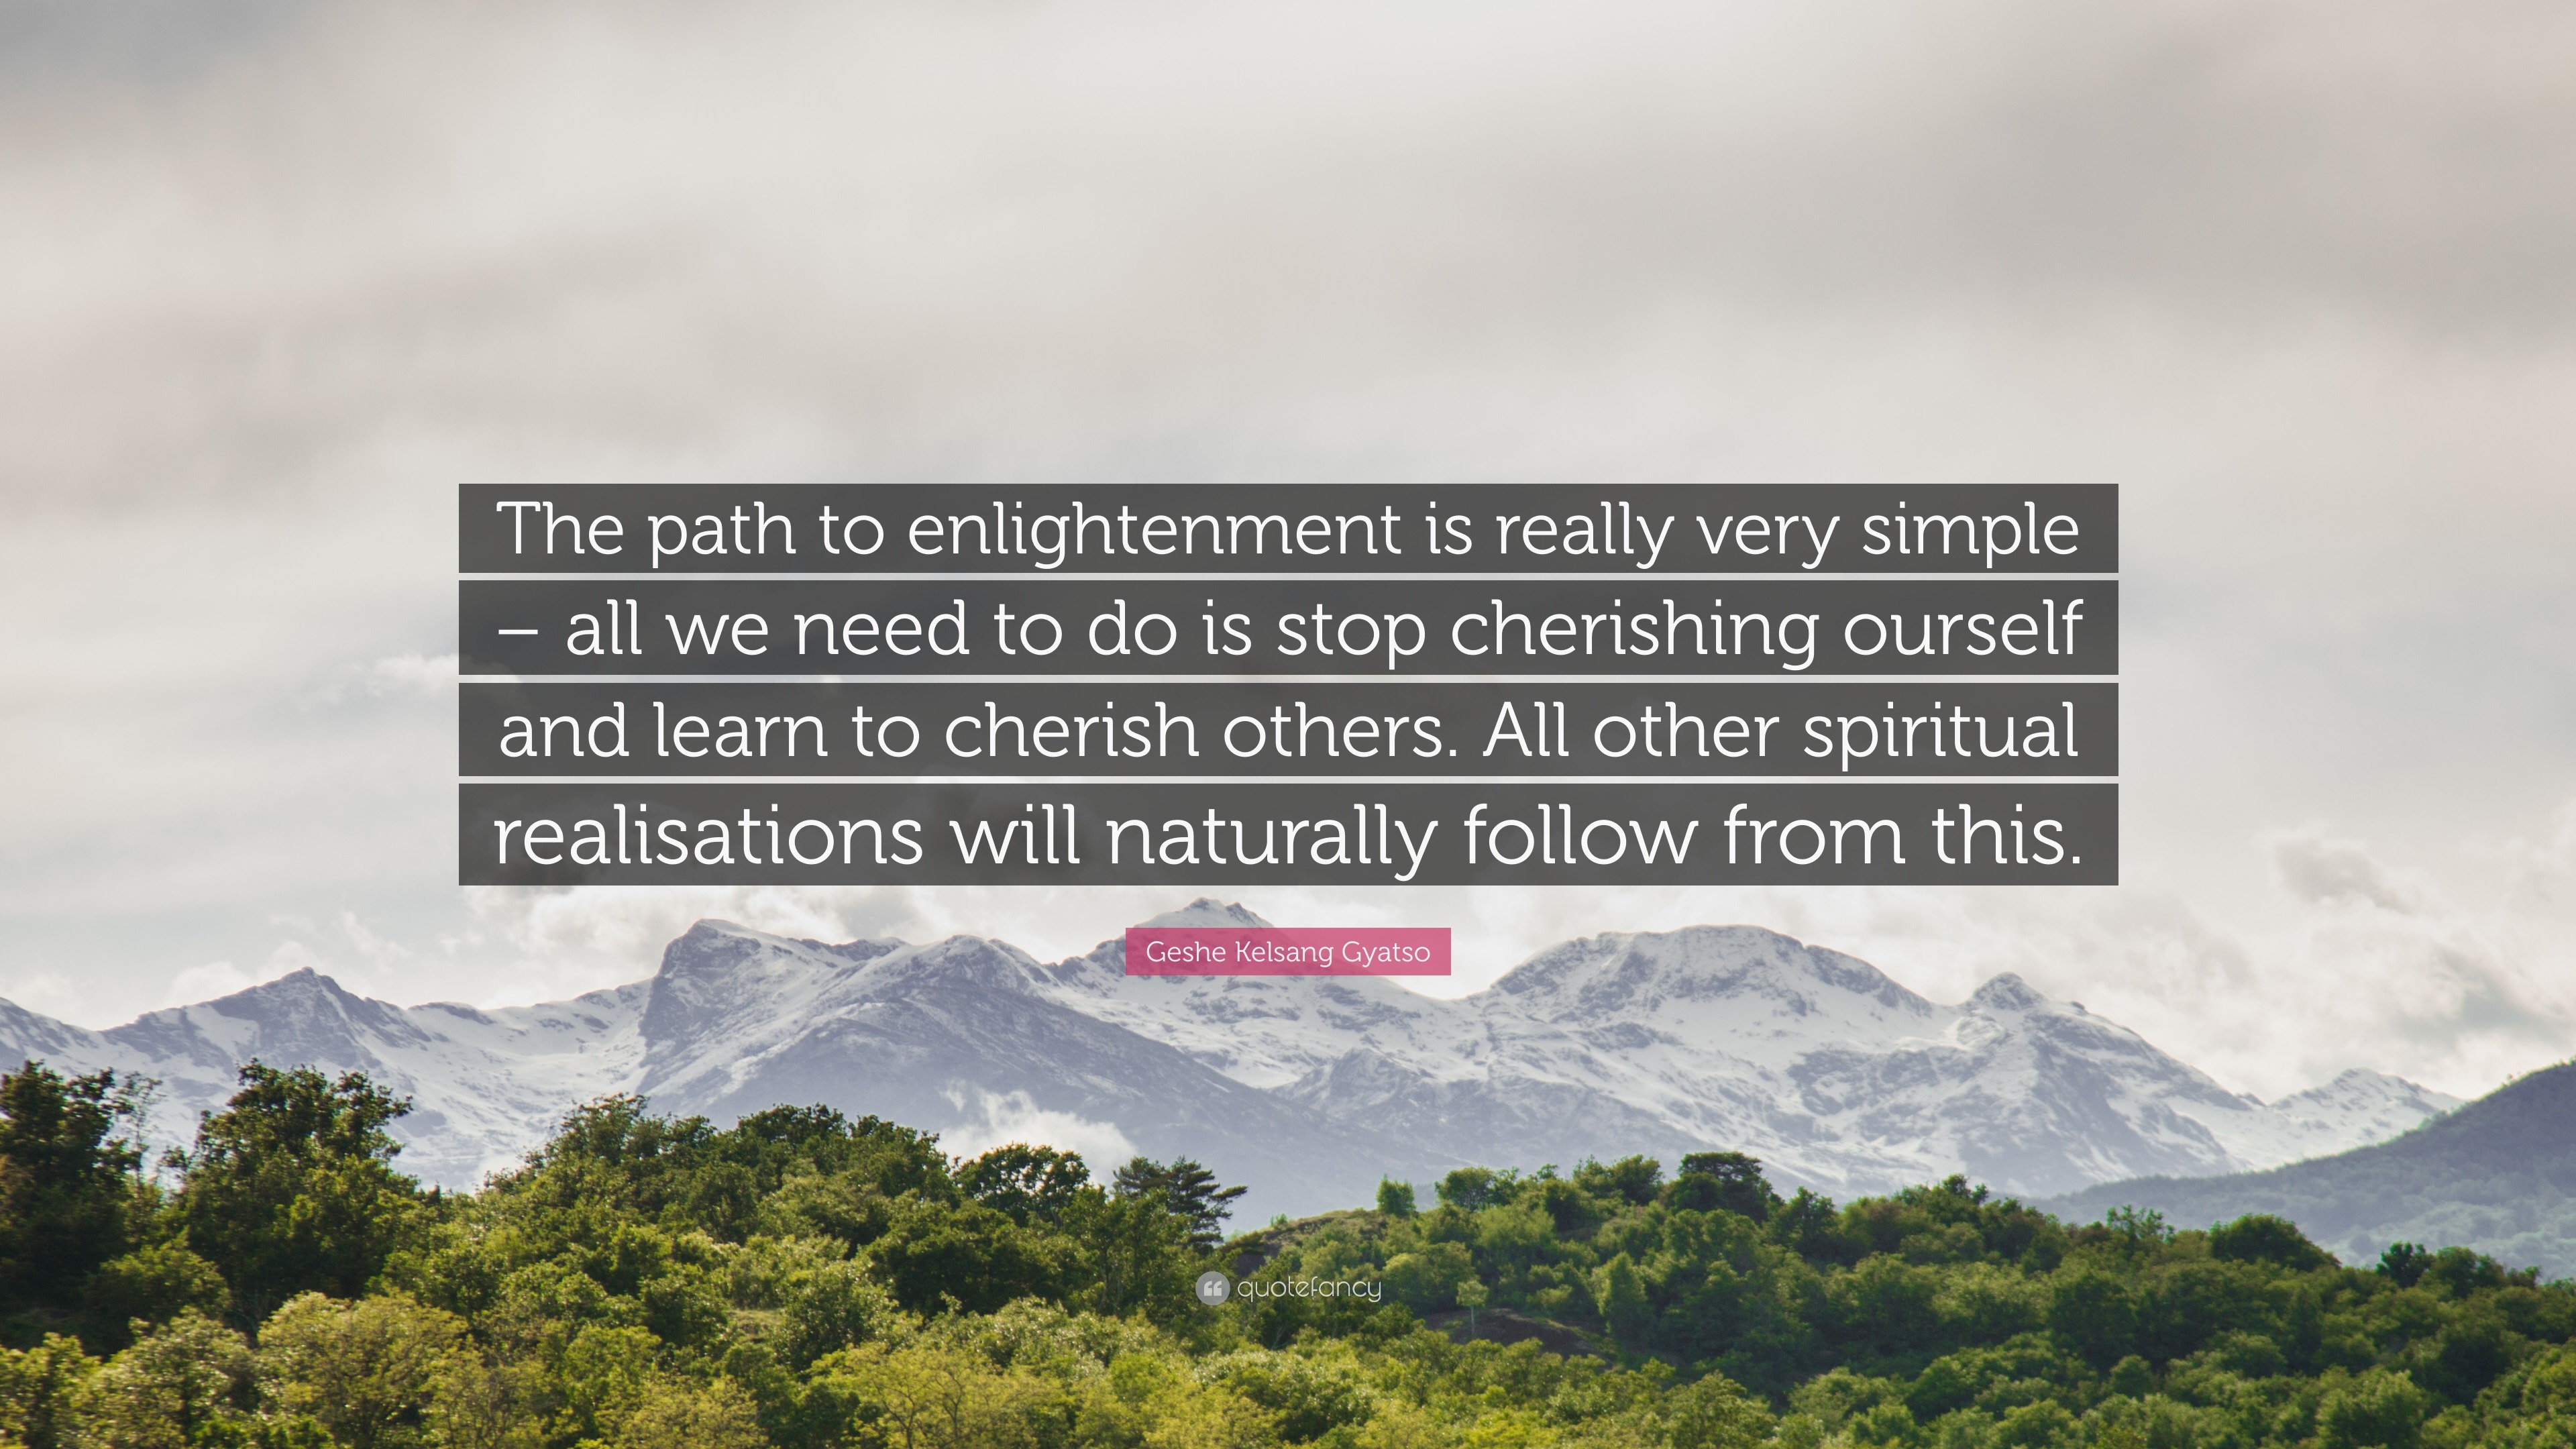 Geshe Kelsang Gyatso Quote: “The path to enlightenment is really very ...